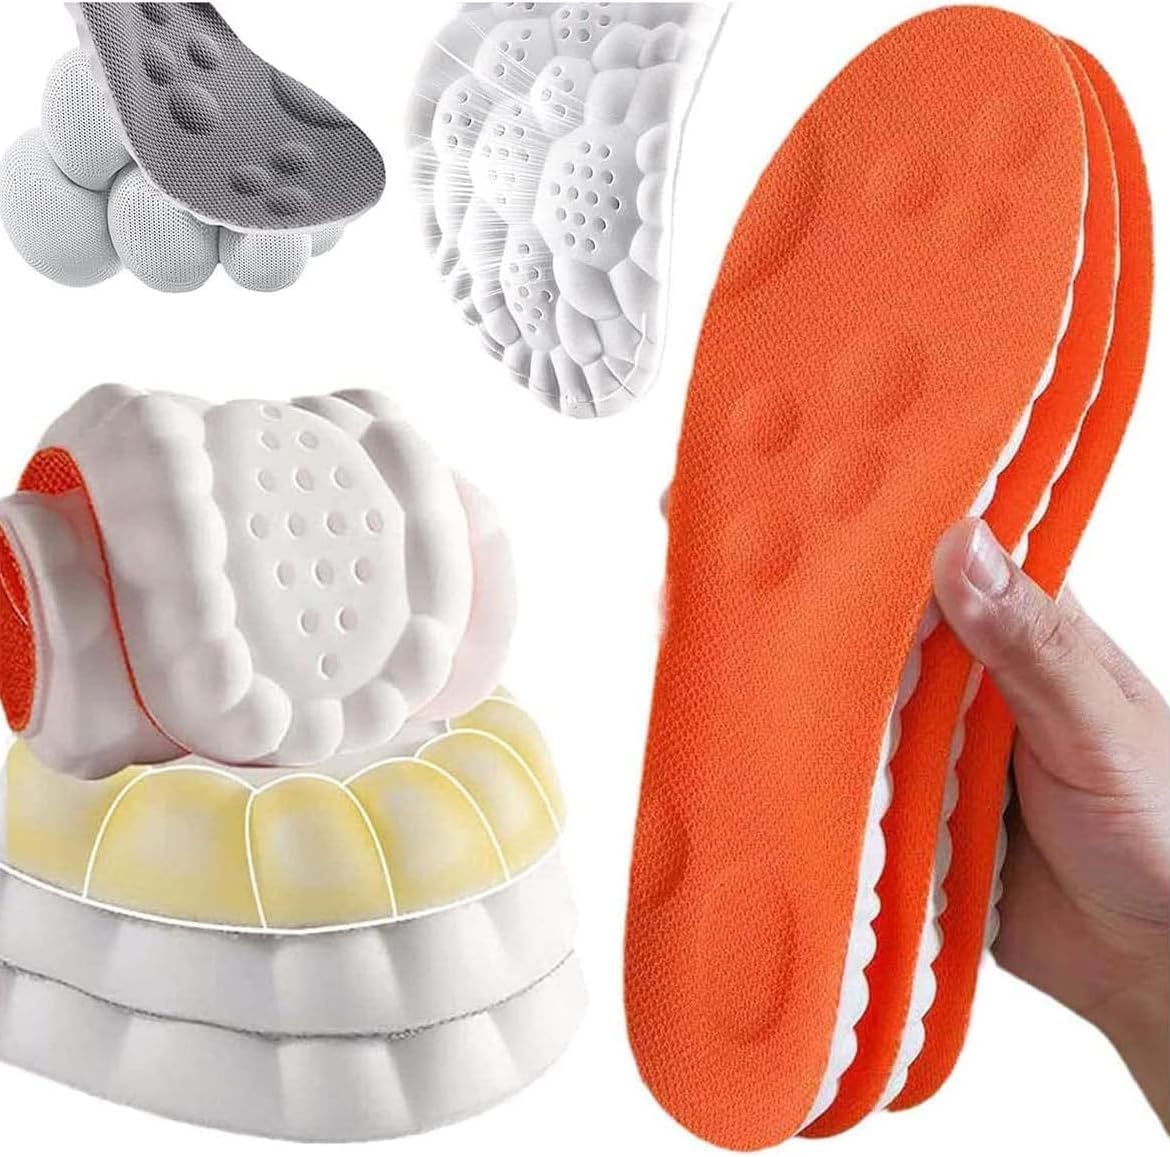 4D Insoles-4D Cloud Technology Insole,Metatarsal Orthotic Insoles Arch Supports Inserts, High-Elastic Shock-Absorbing Insoles,Plantar Fasciitis, Ball of Foot Pain Relief (41-42, orange)